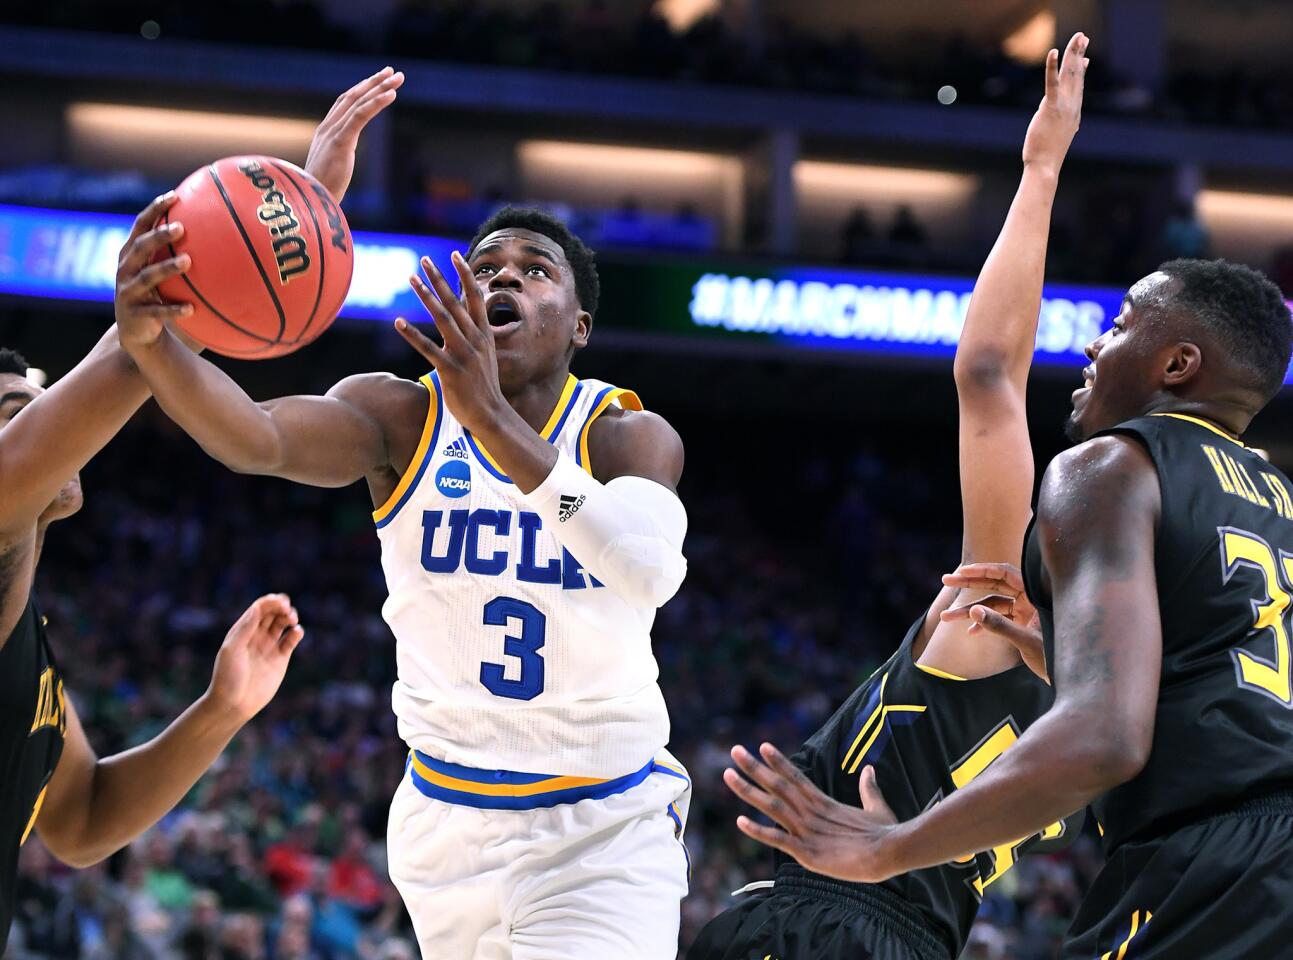 UCLA guard Aaron Holiday drives for a basket against Kent State during the second half.